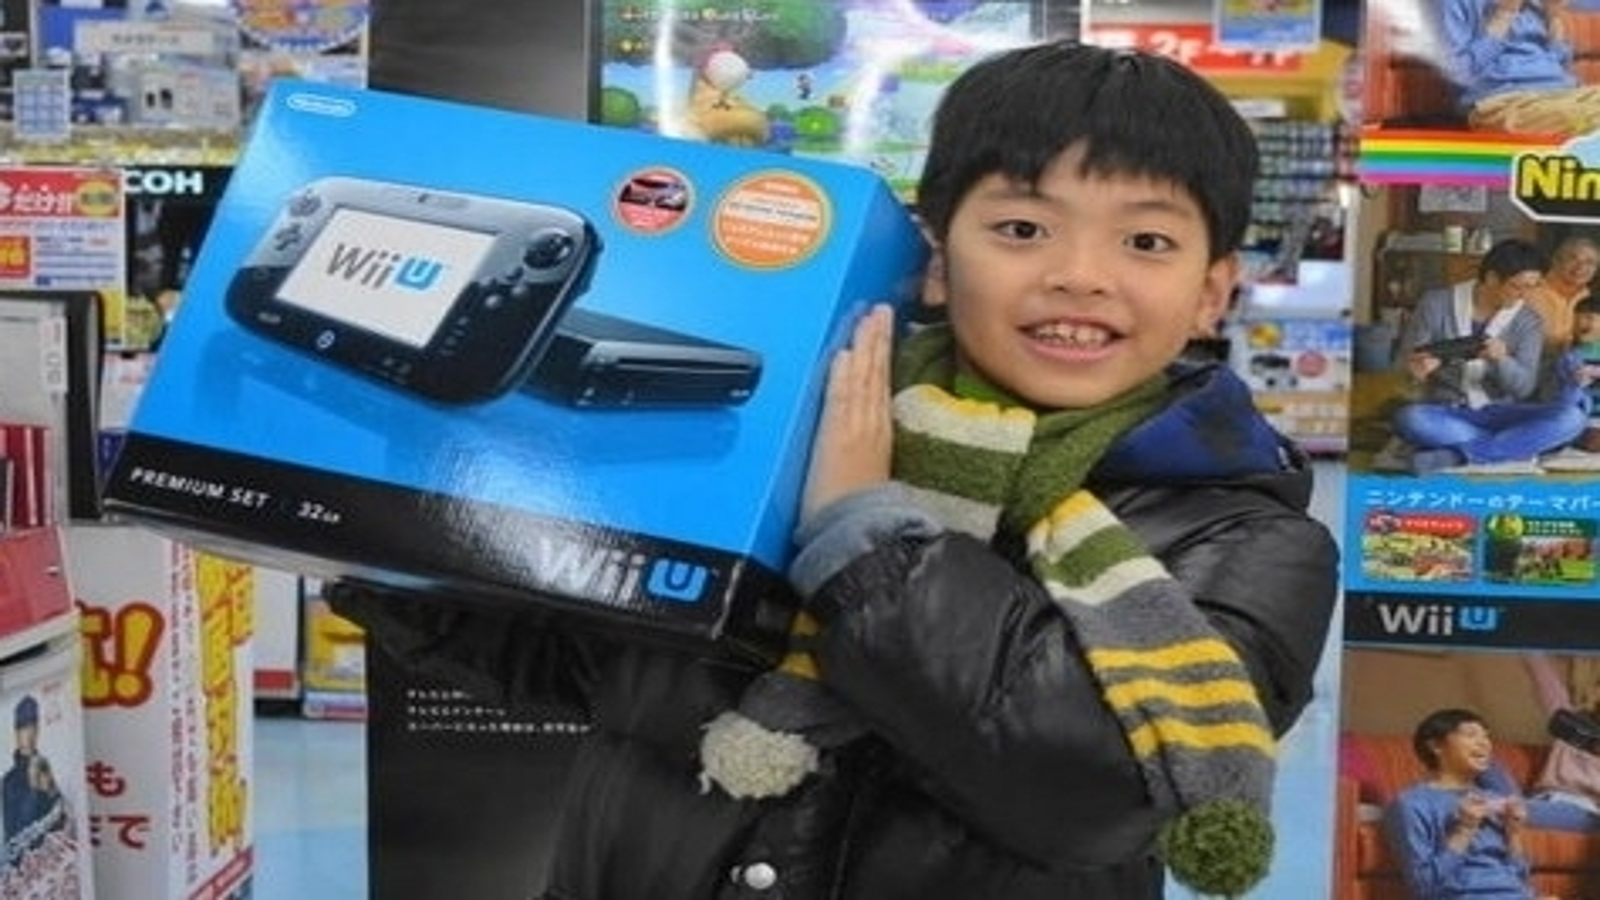 Wii U Launch Detailed For Japan, Arriving This December